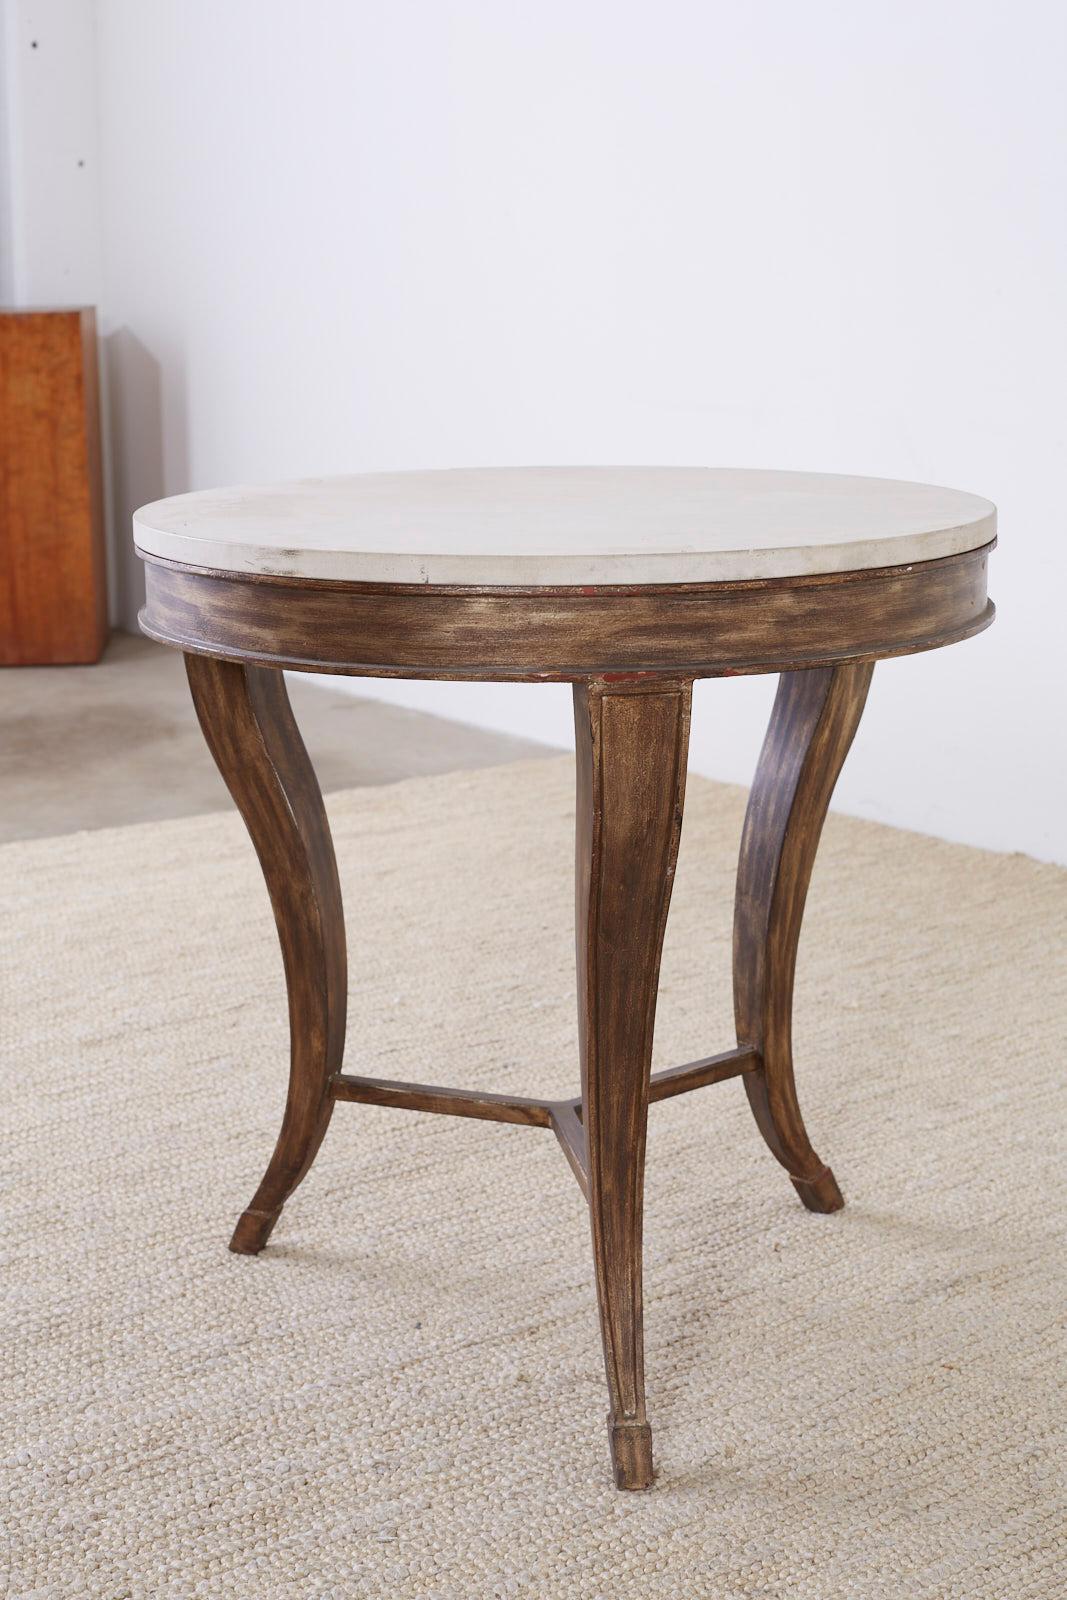 American Iron and Stone Top Center Table or Drink Table